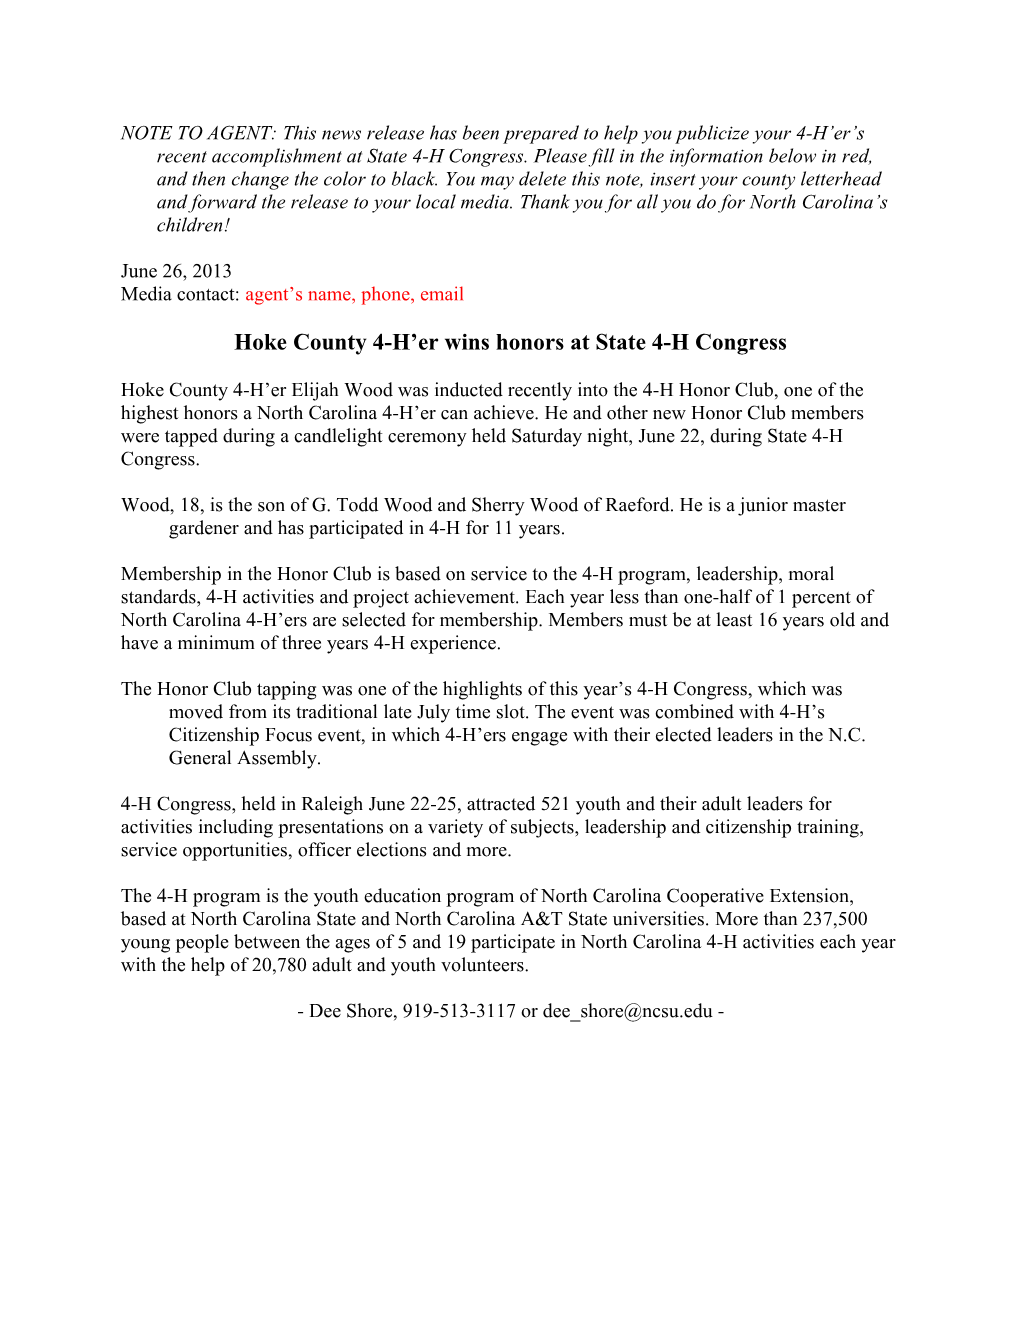 Modified Template for 4-H Congress Press Releases s1